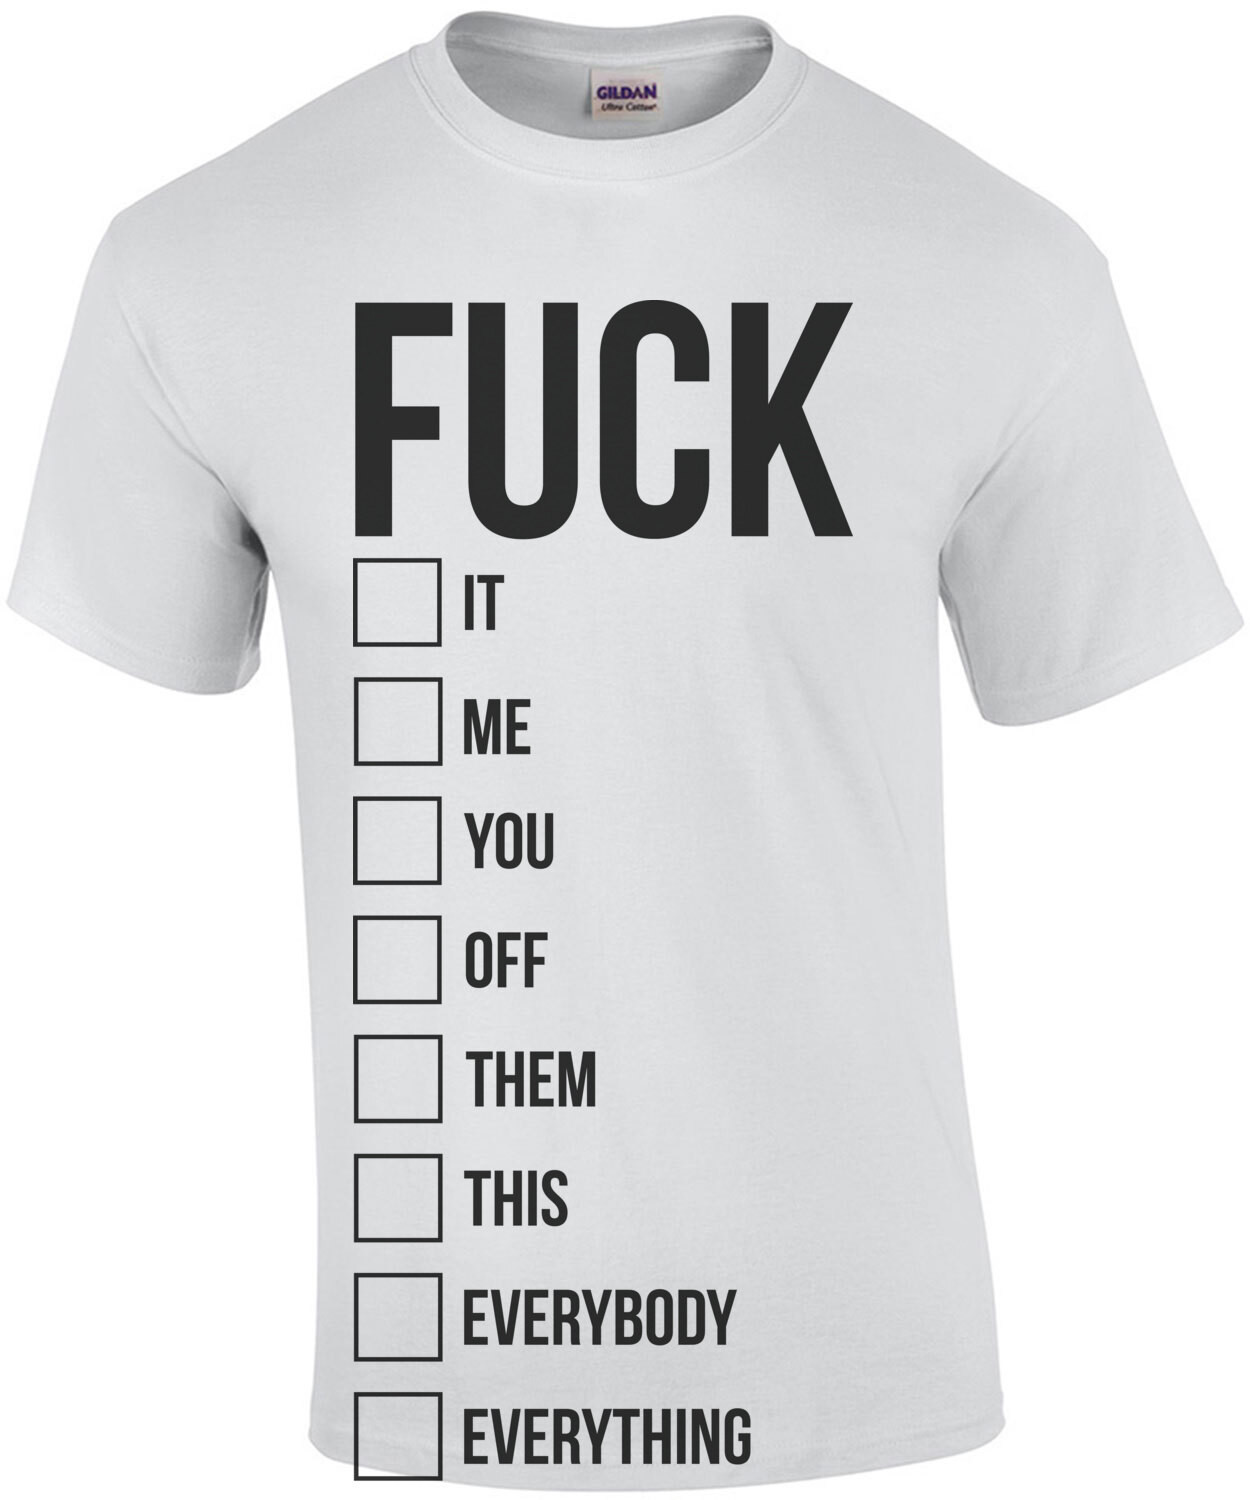 The word fuck and all of its meanings - funny offensive tshirt